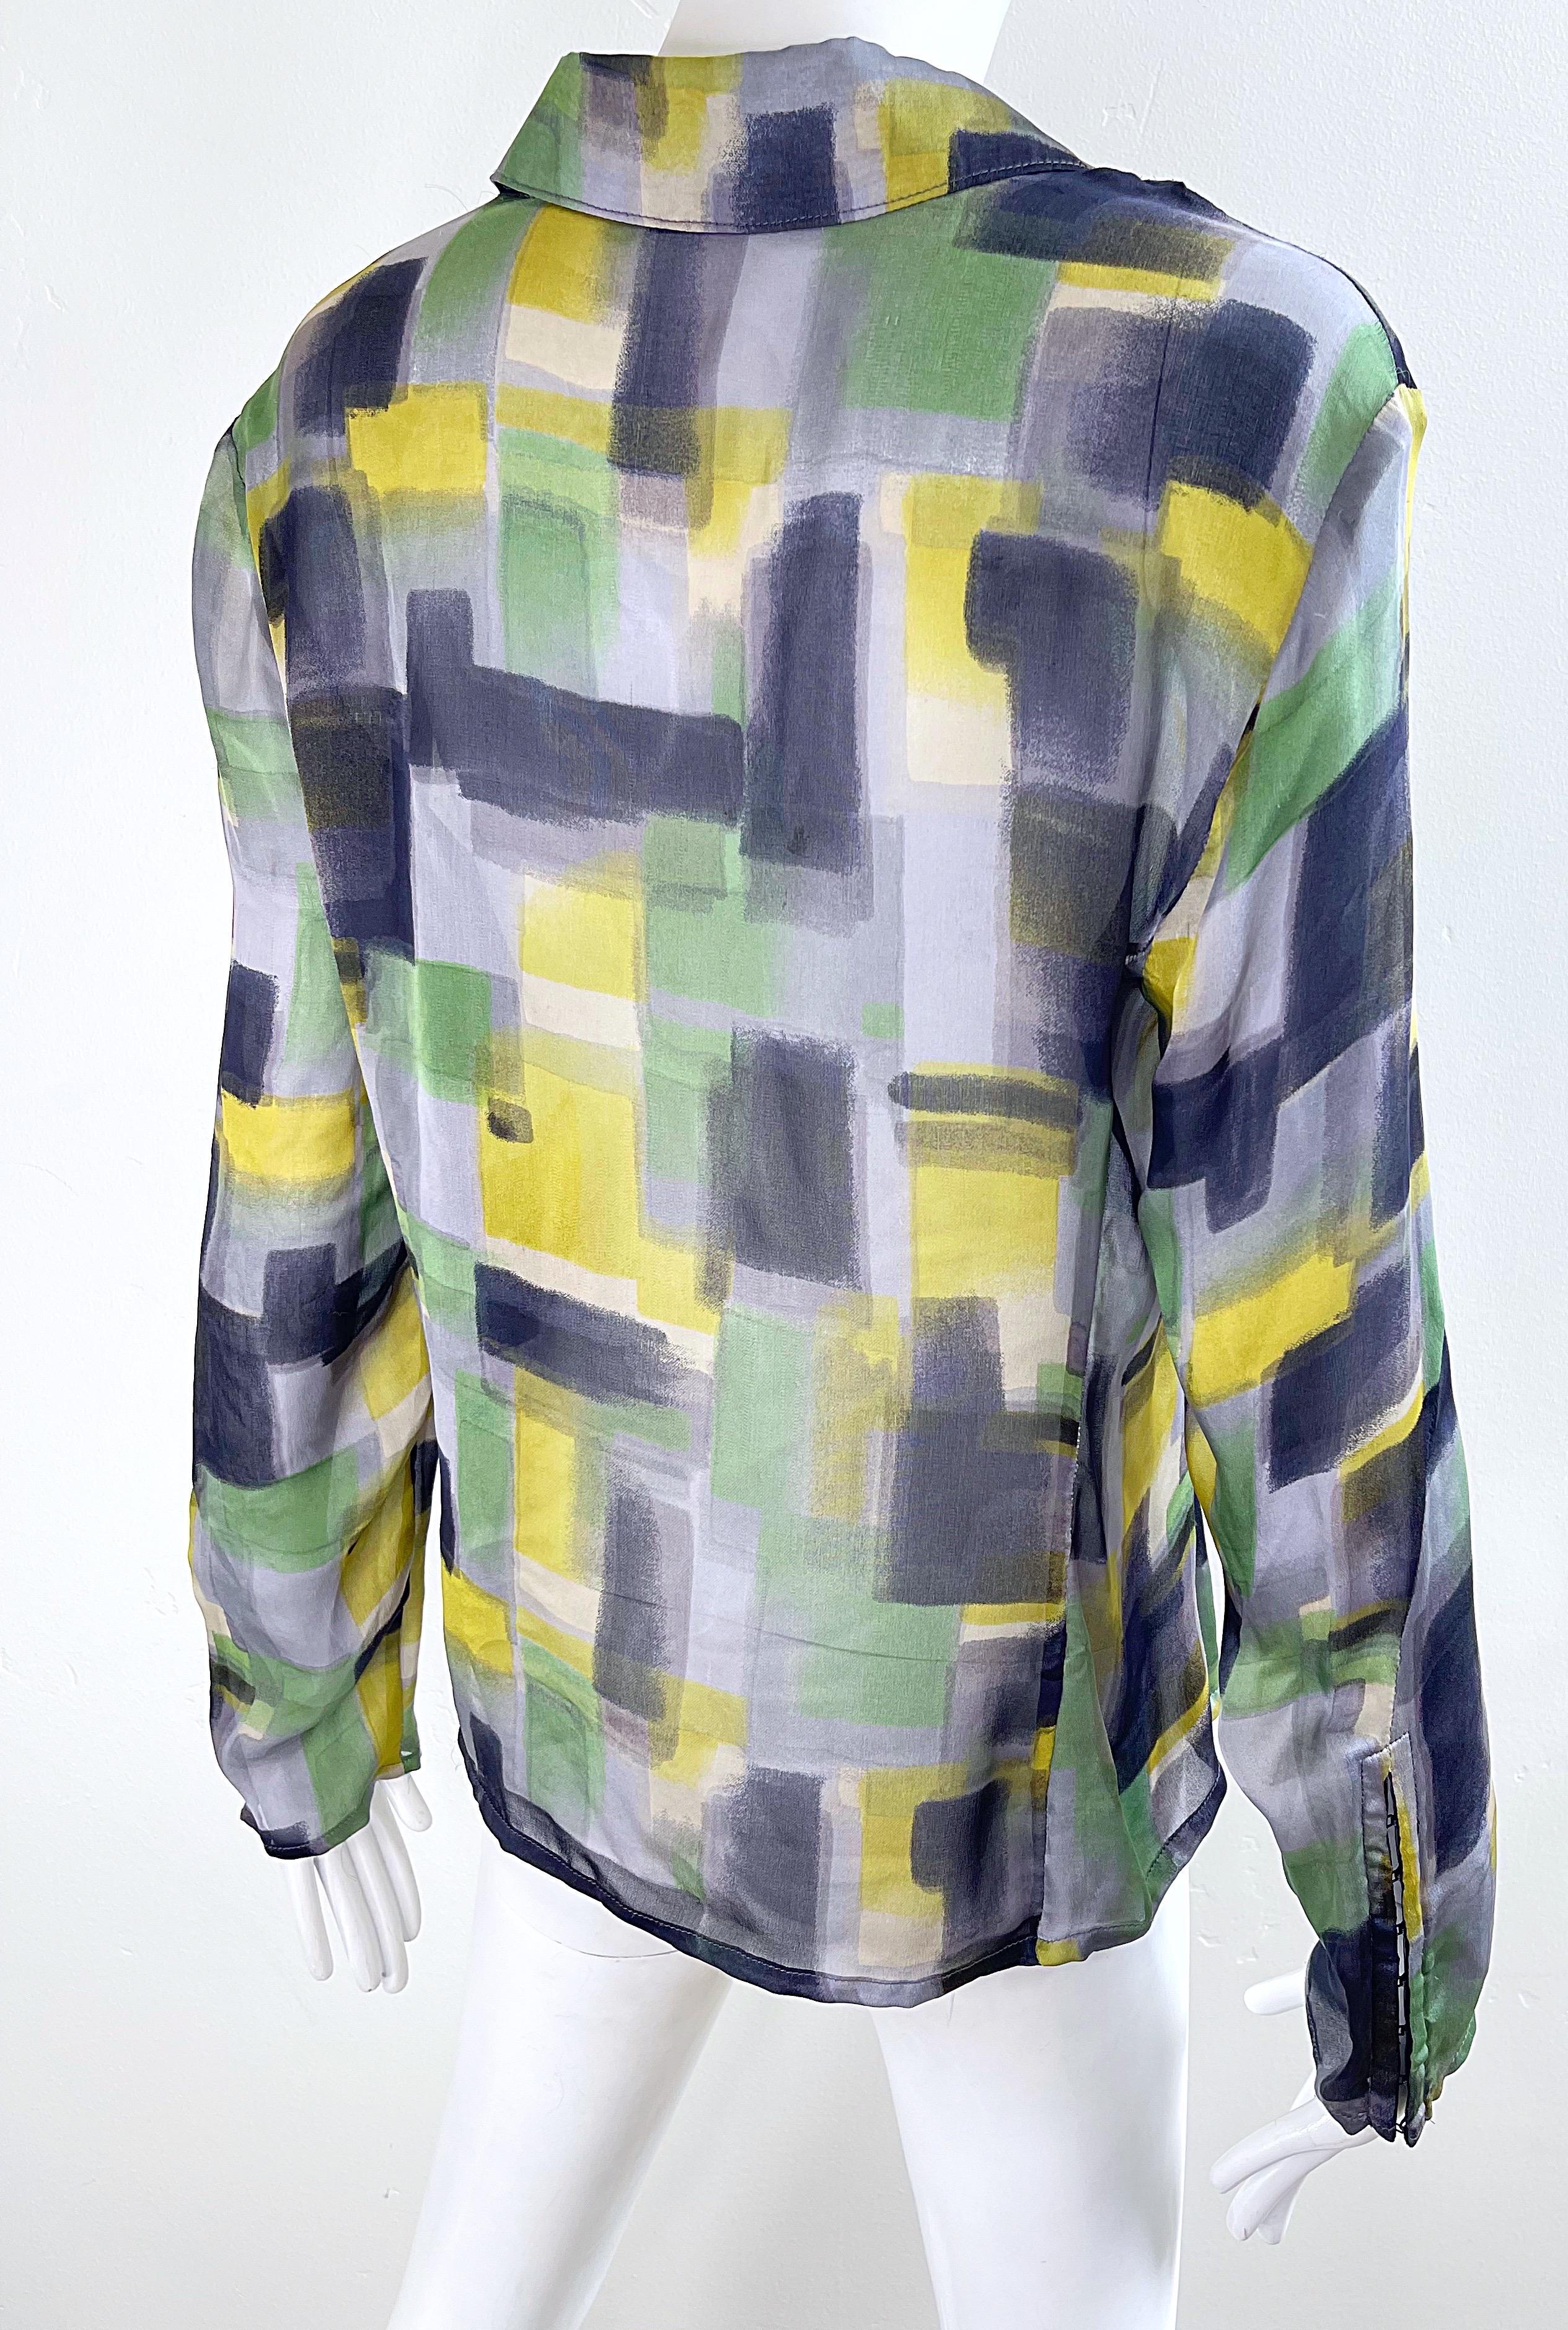 NWT Zenobia Saks 5th Avenue Size 12 Sheer Silk Chiffon Abstract Print Blouse Top For Sale 9